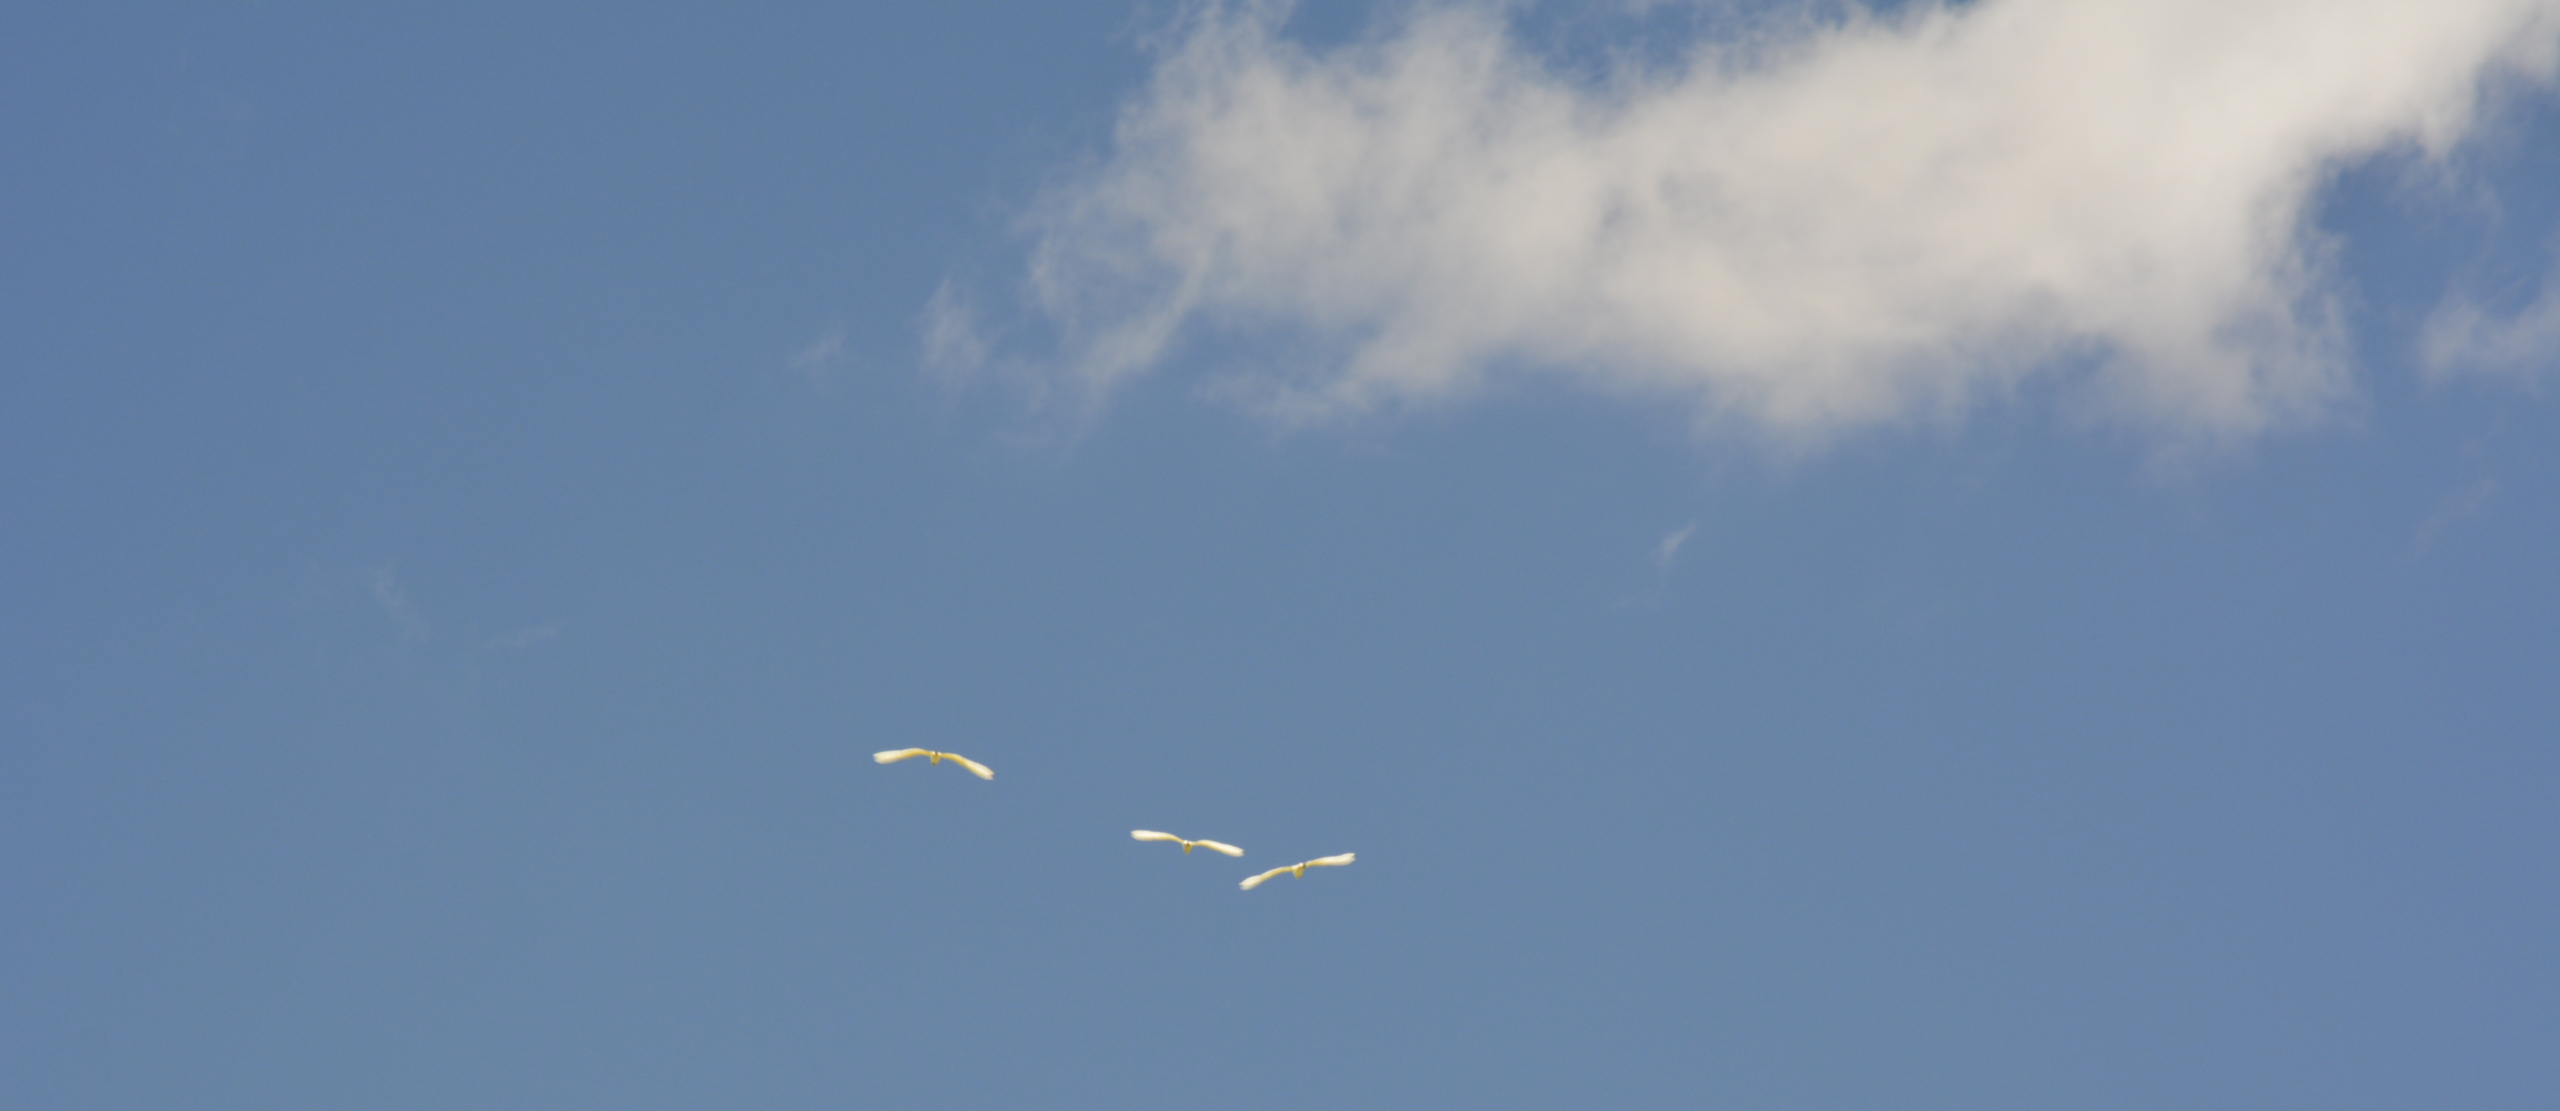 blue skies with a white fluffy cloud on the right and three white birds flying to find the lost art of happiness